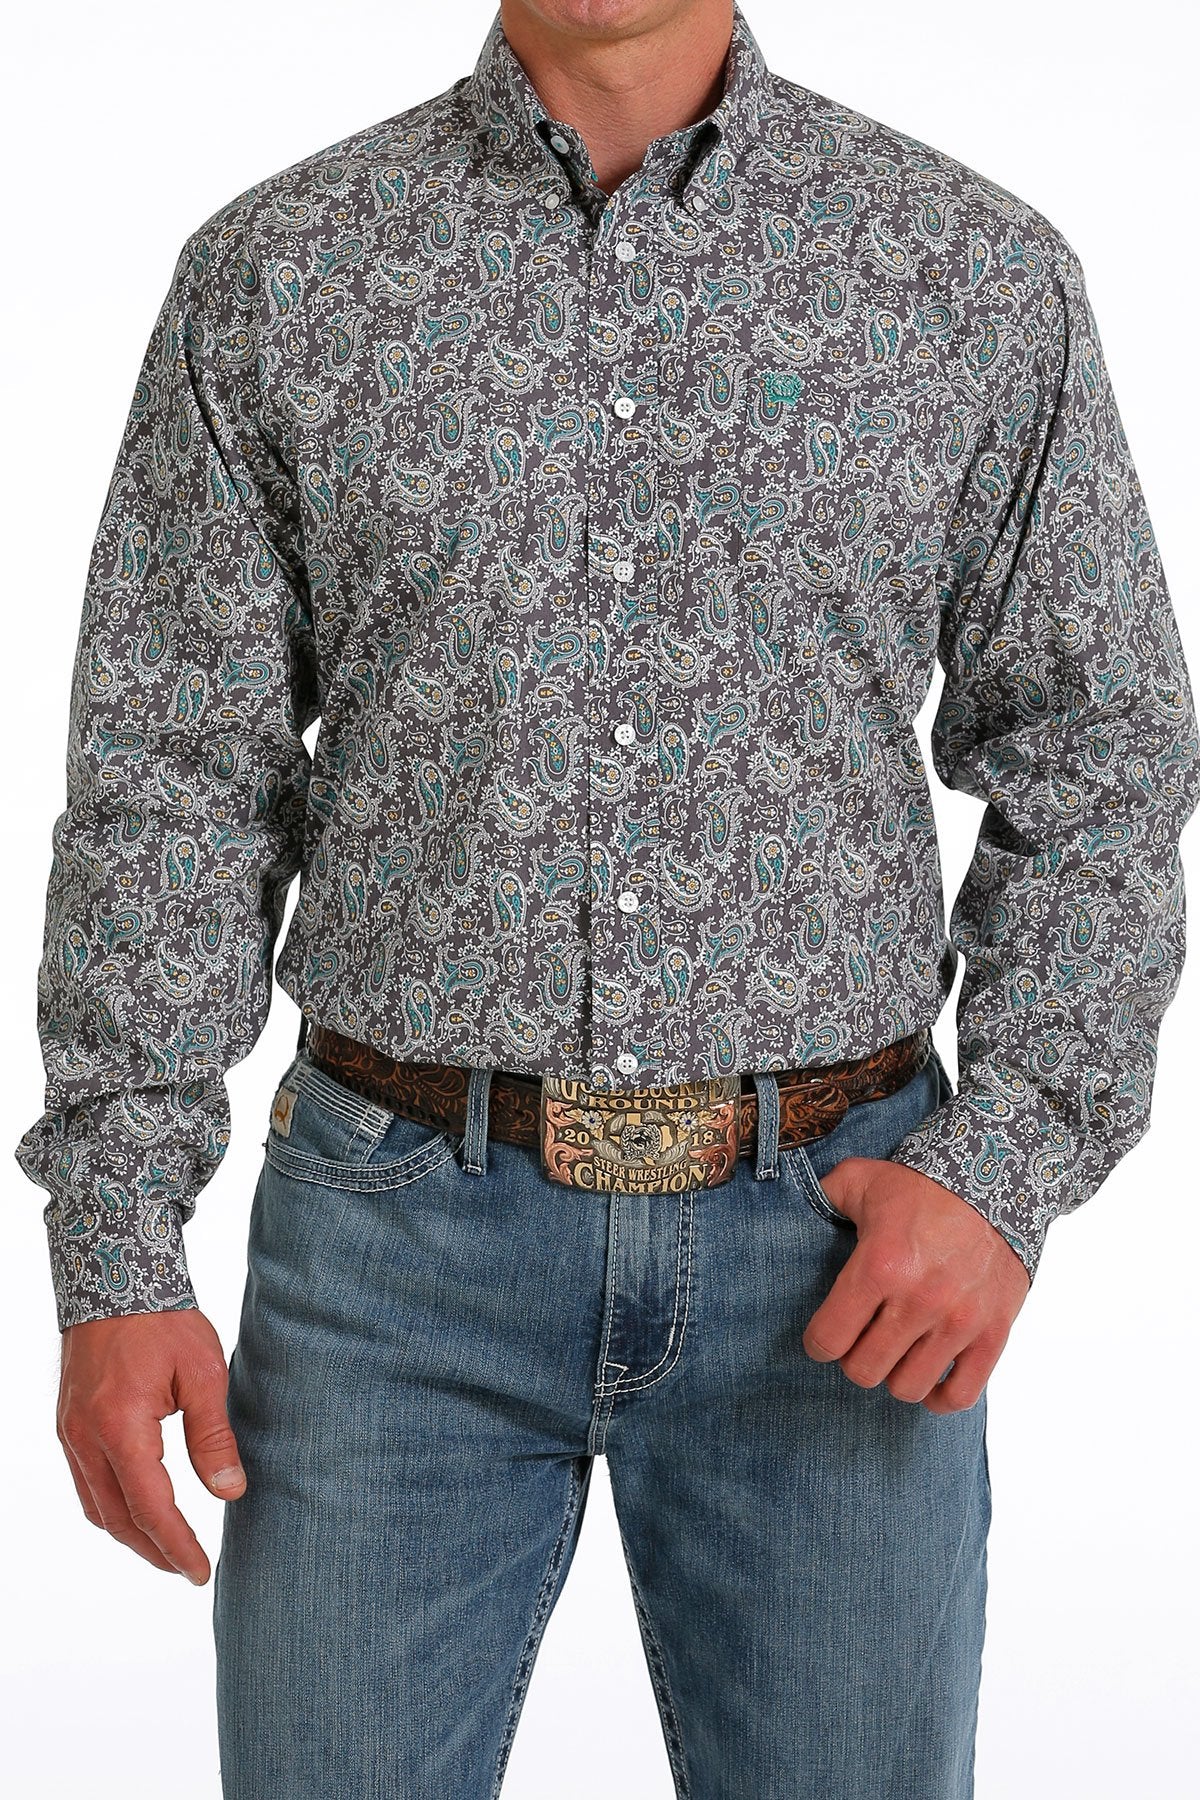 Cinch Mens Paisley Buttoned Down Western L/S Shirt - Grey/White/Teal - MTW1105584